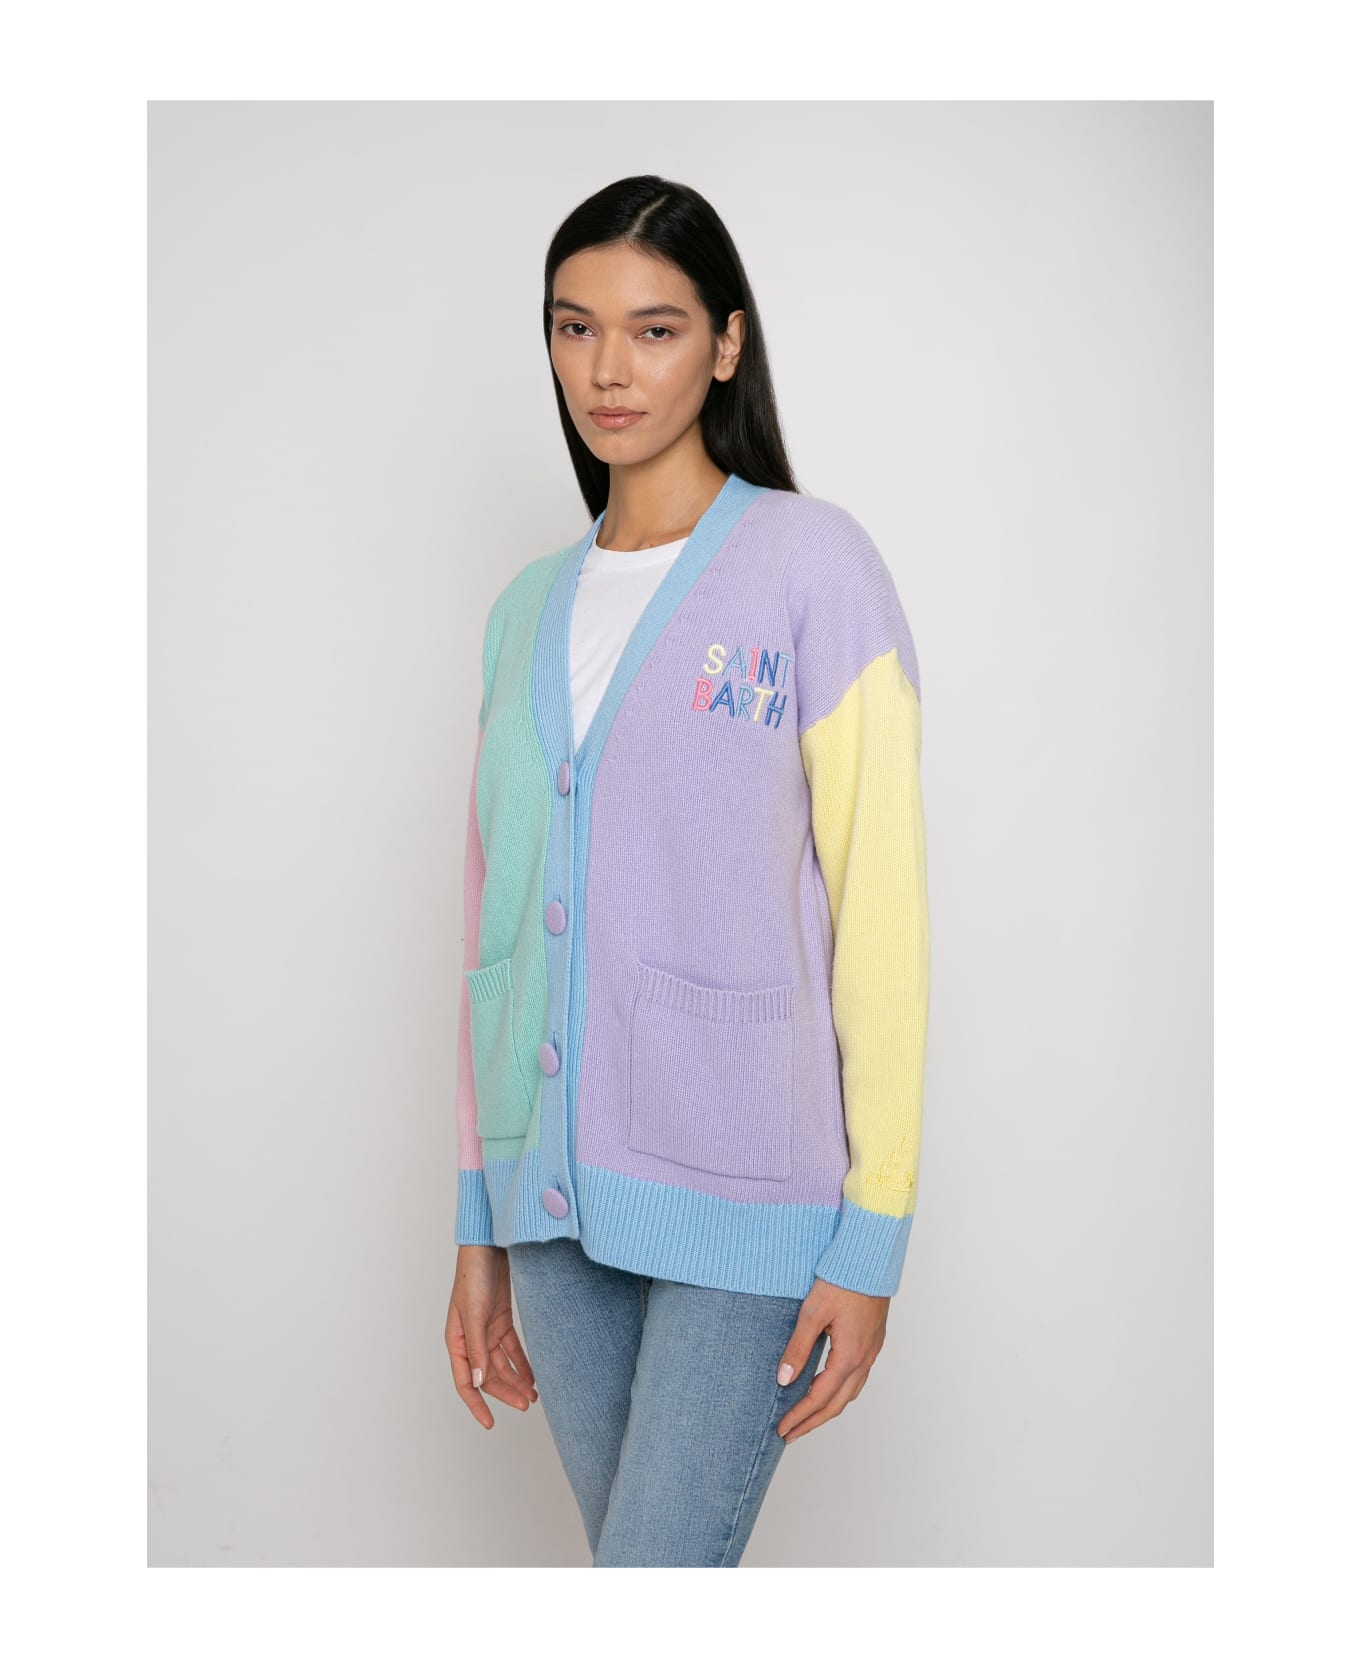 MC2 Saint Barth Woman Cardigan With Pockets And Saint Barth Embroidery - MULTICOLOR